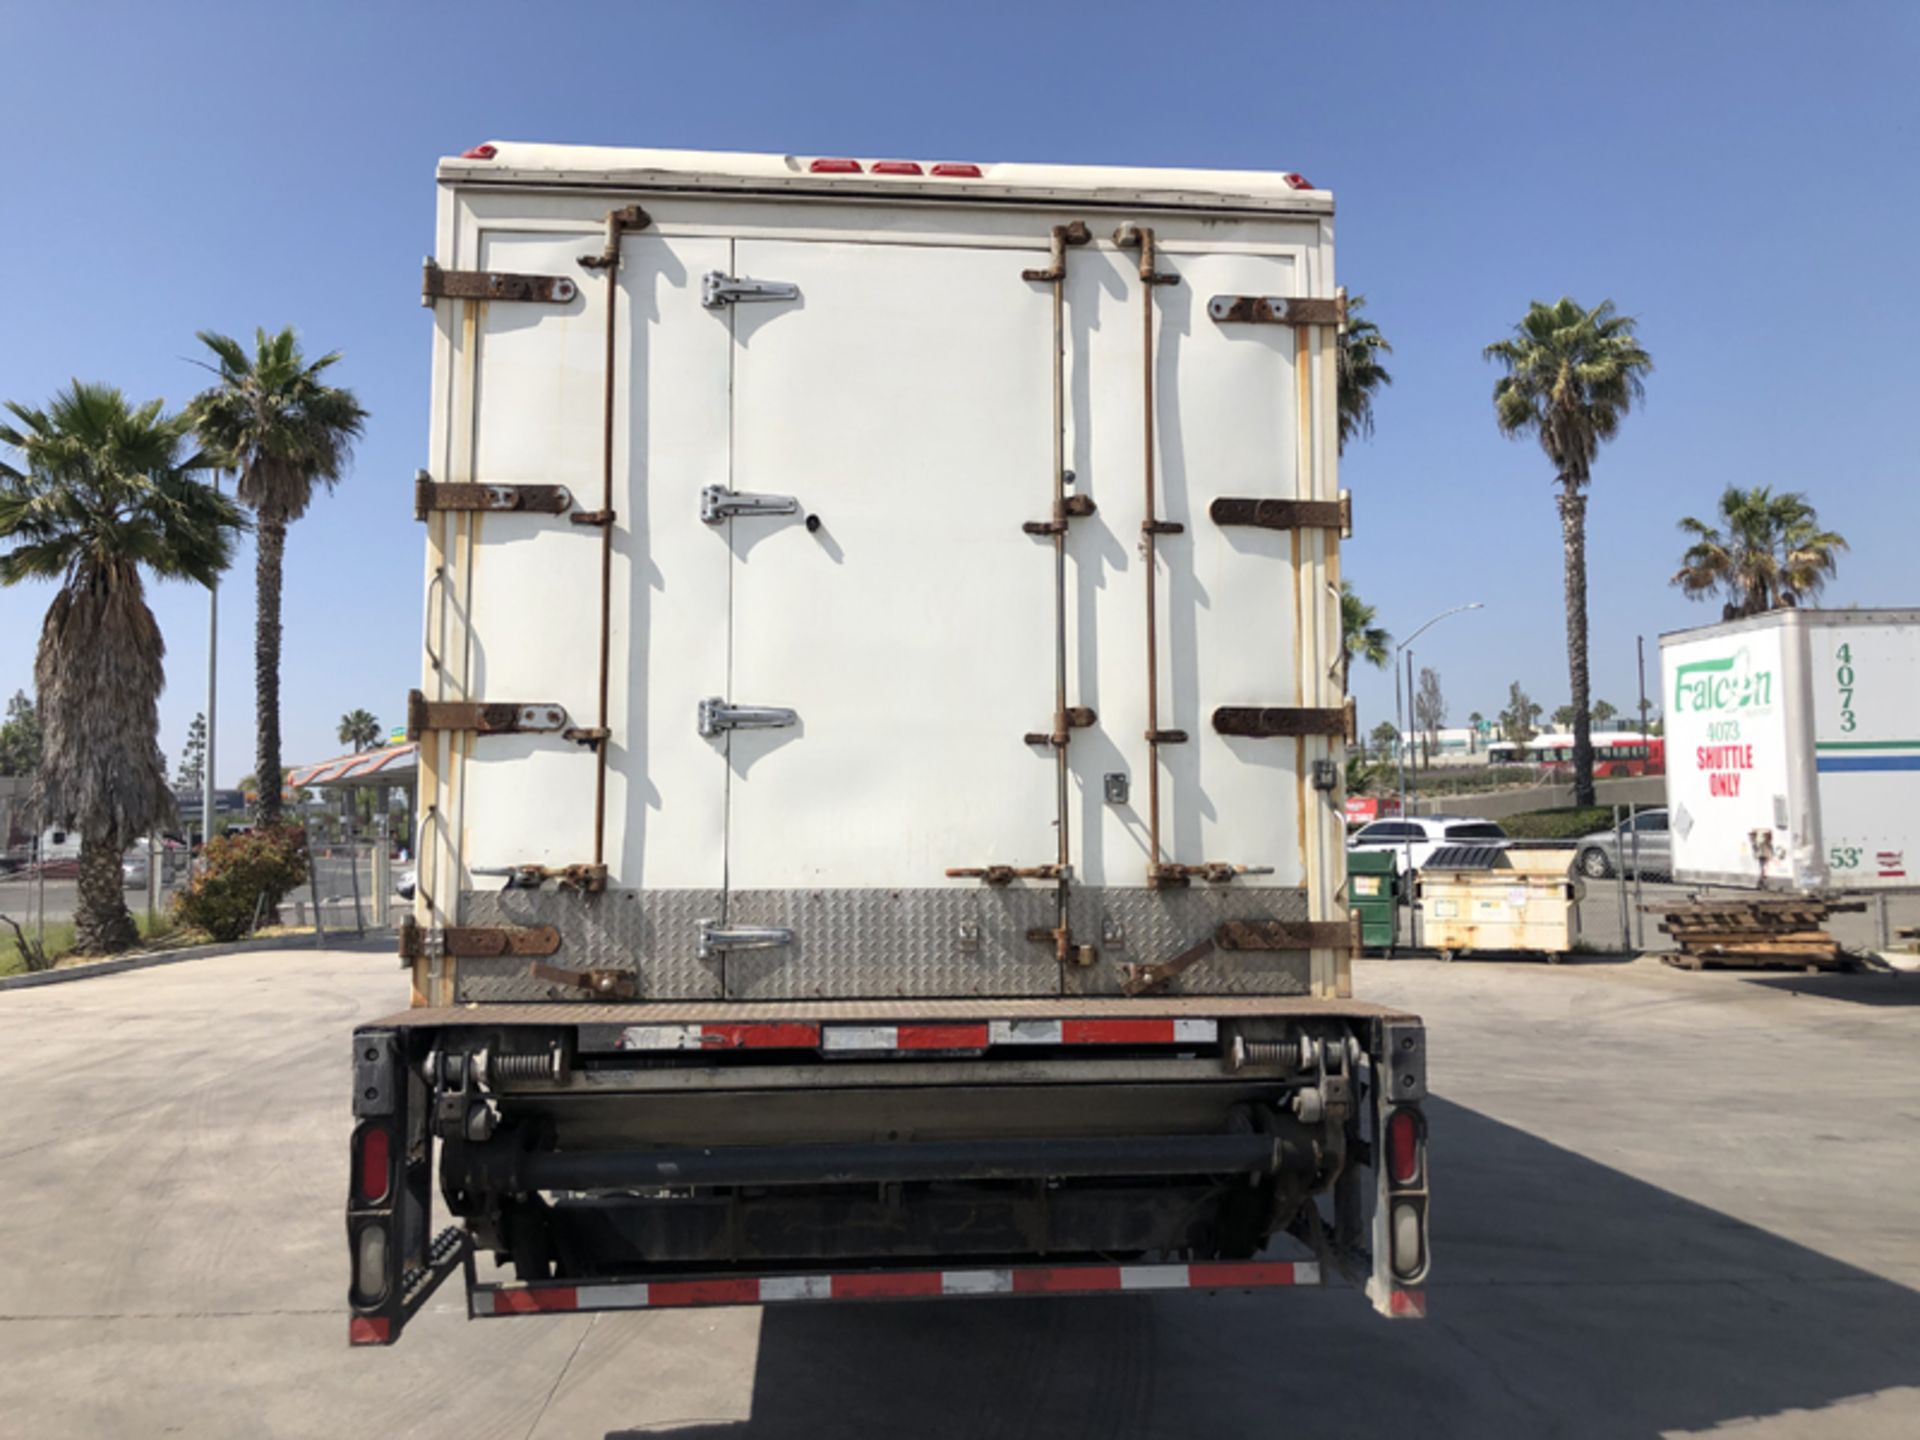 2018 INTERNATIONAL 4400 SBA 6X4 REFRIGERATED BOX TRUCK VIN#: 1HTMSTAR2JH529630, Approx Miles: 31958, - Image 6 of 10